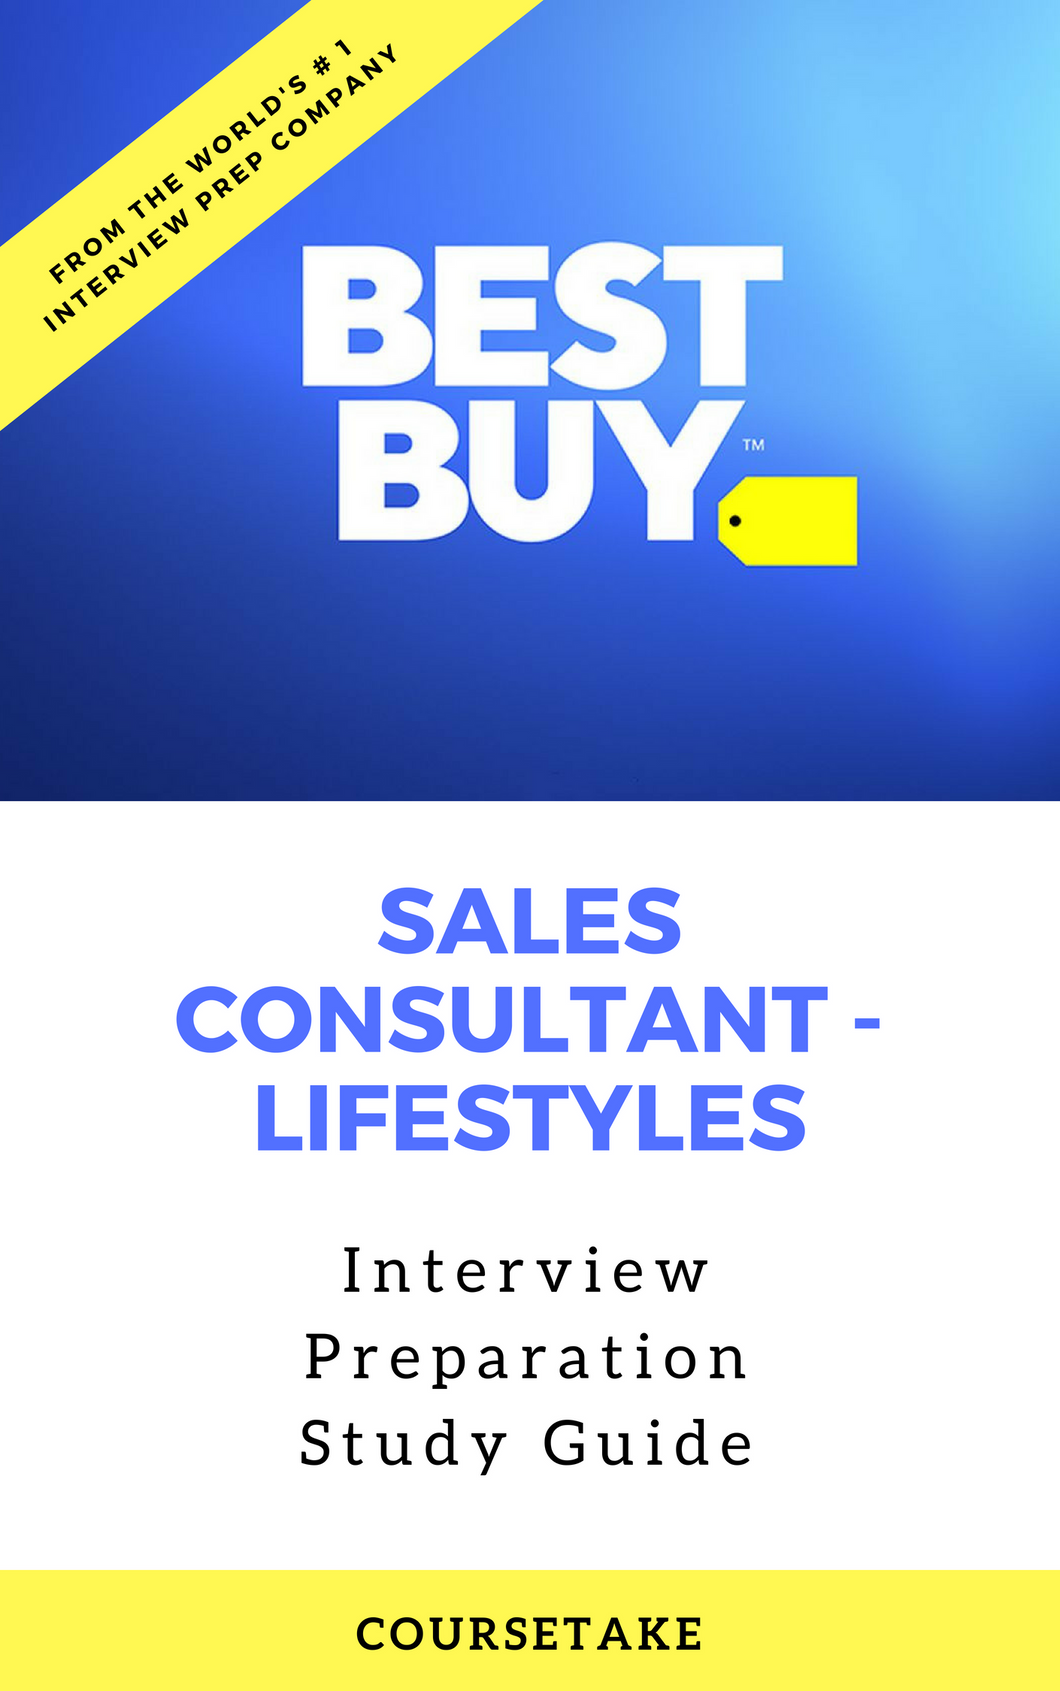 Best Buy Sales Consultant - Lifestyles Interview Preparation Study Guide